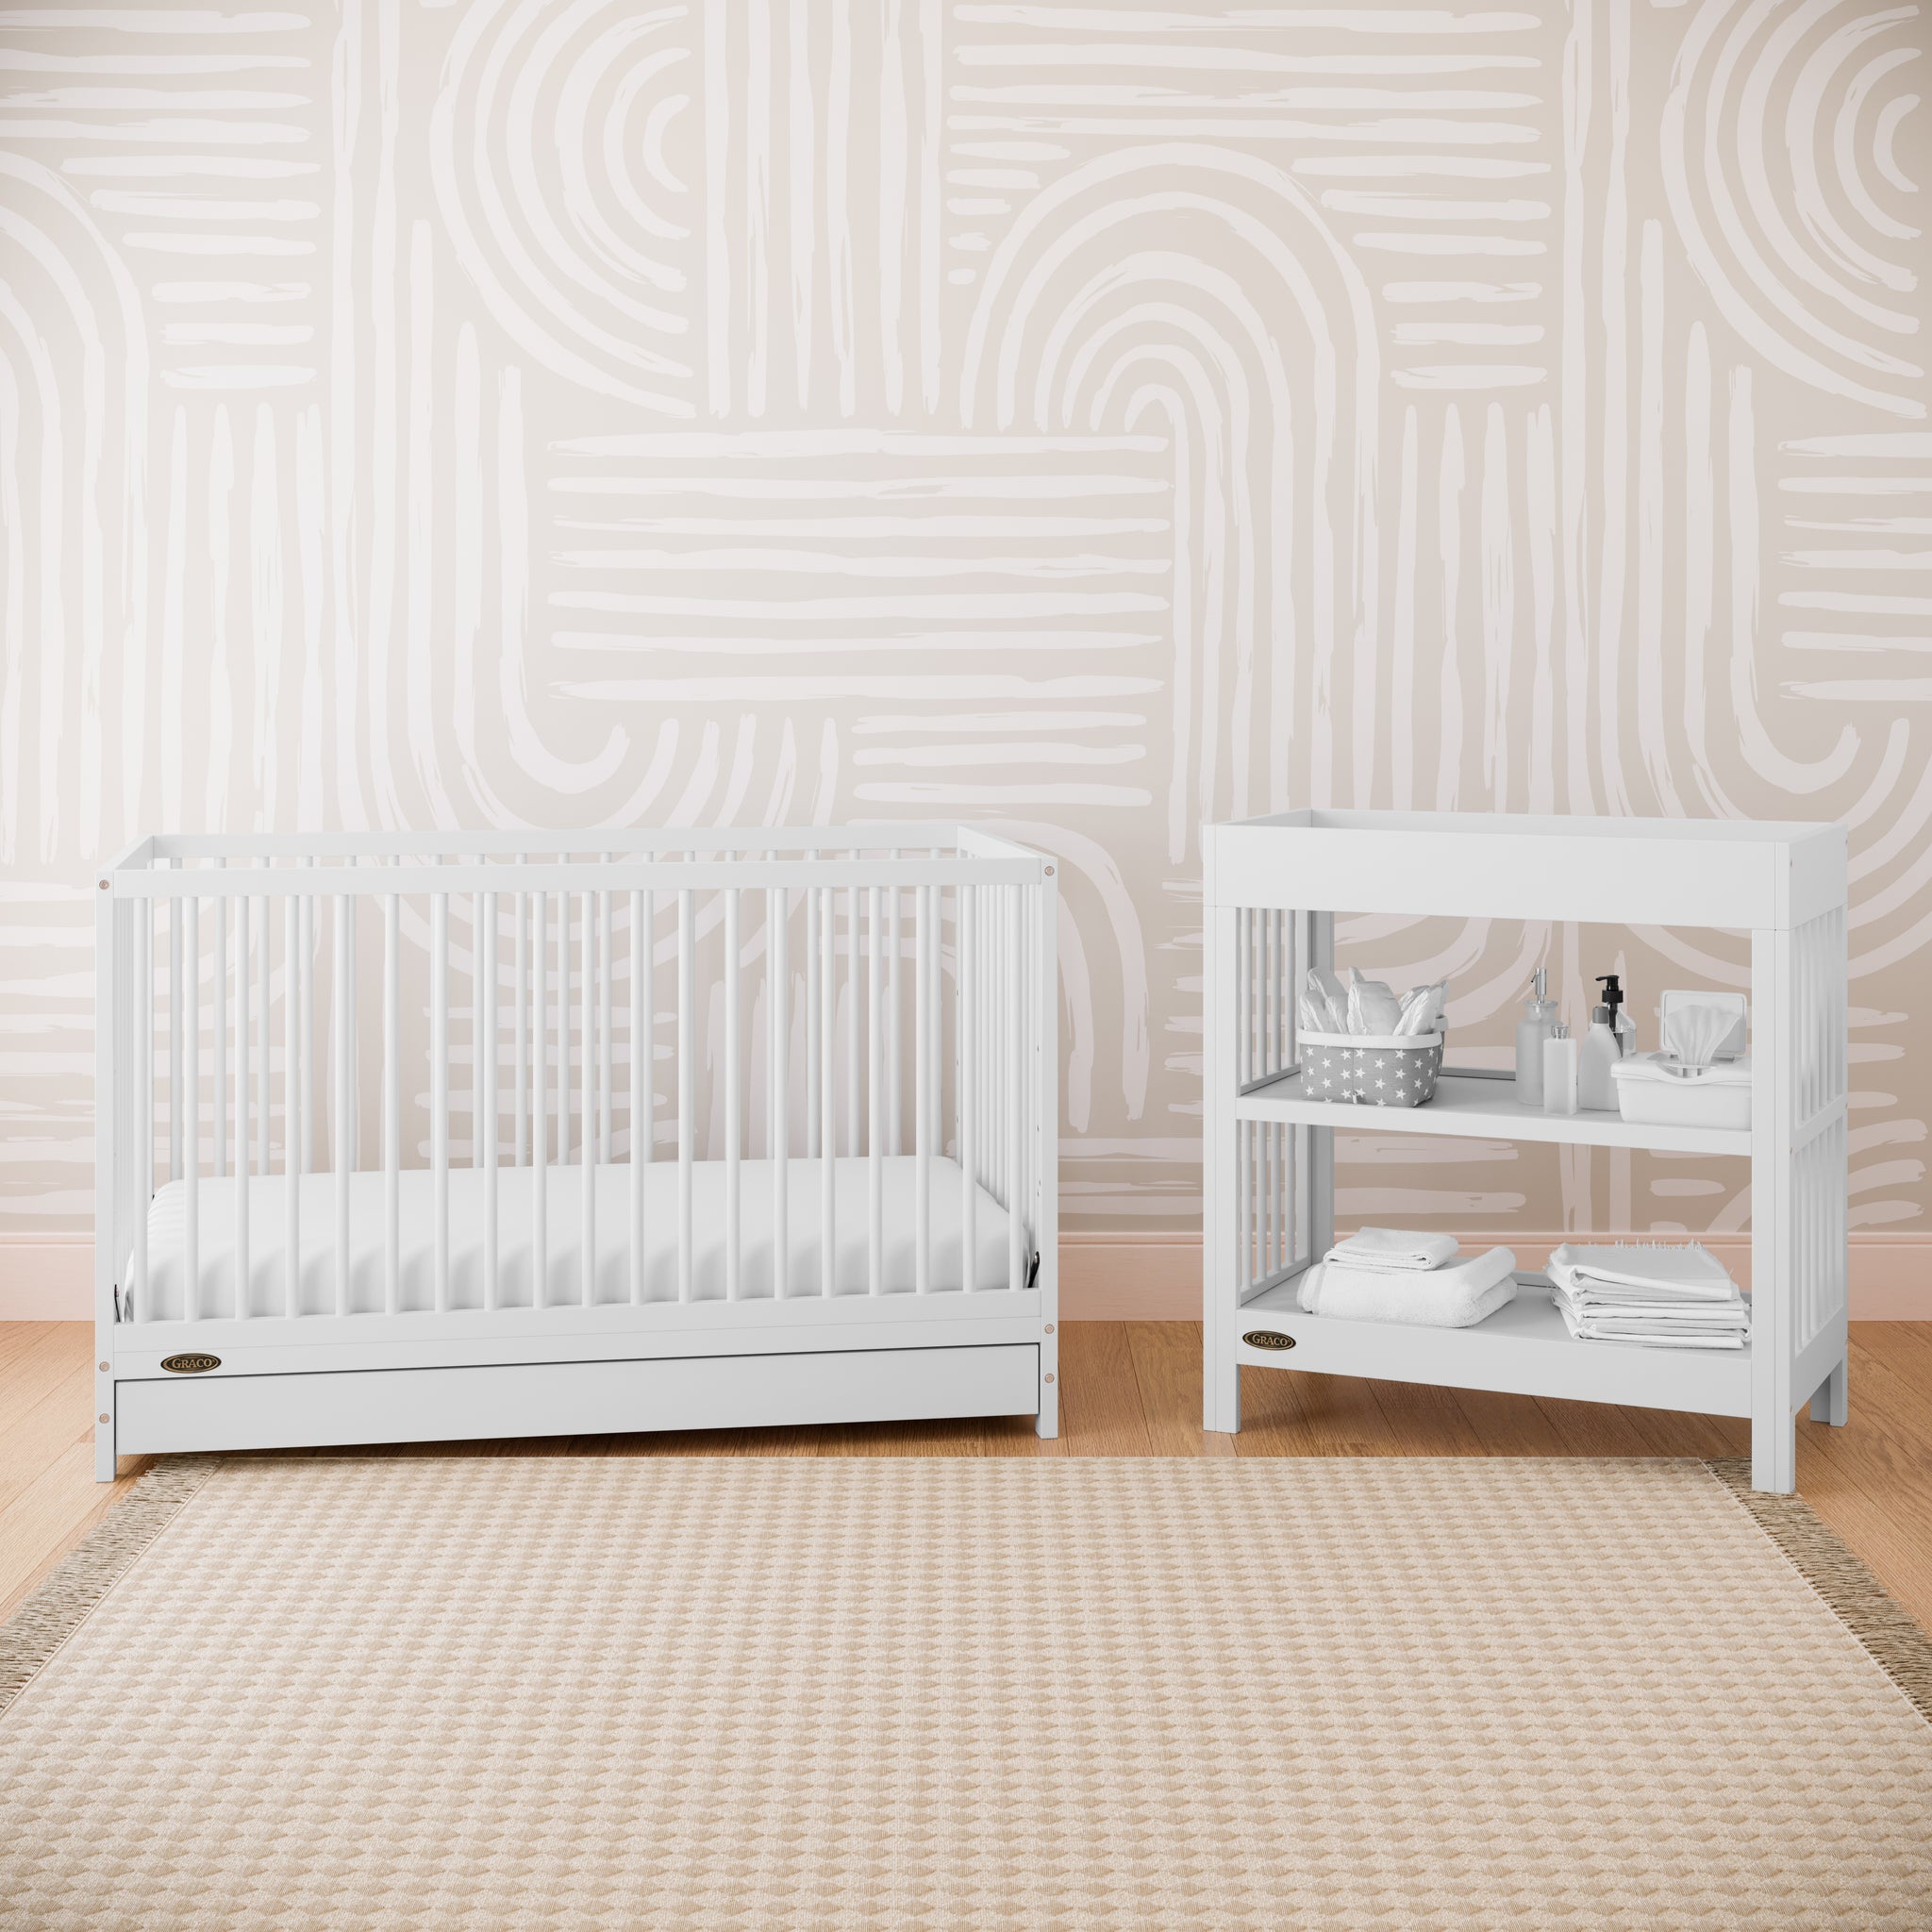 White crib with drawer in nursery